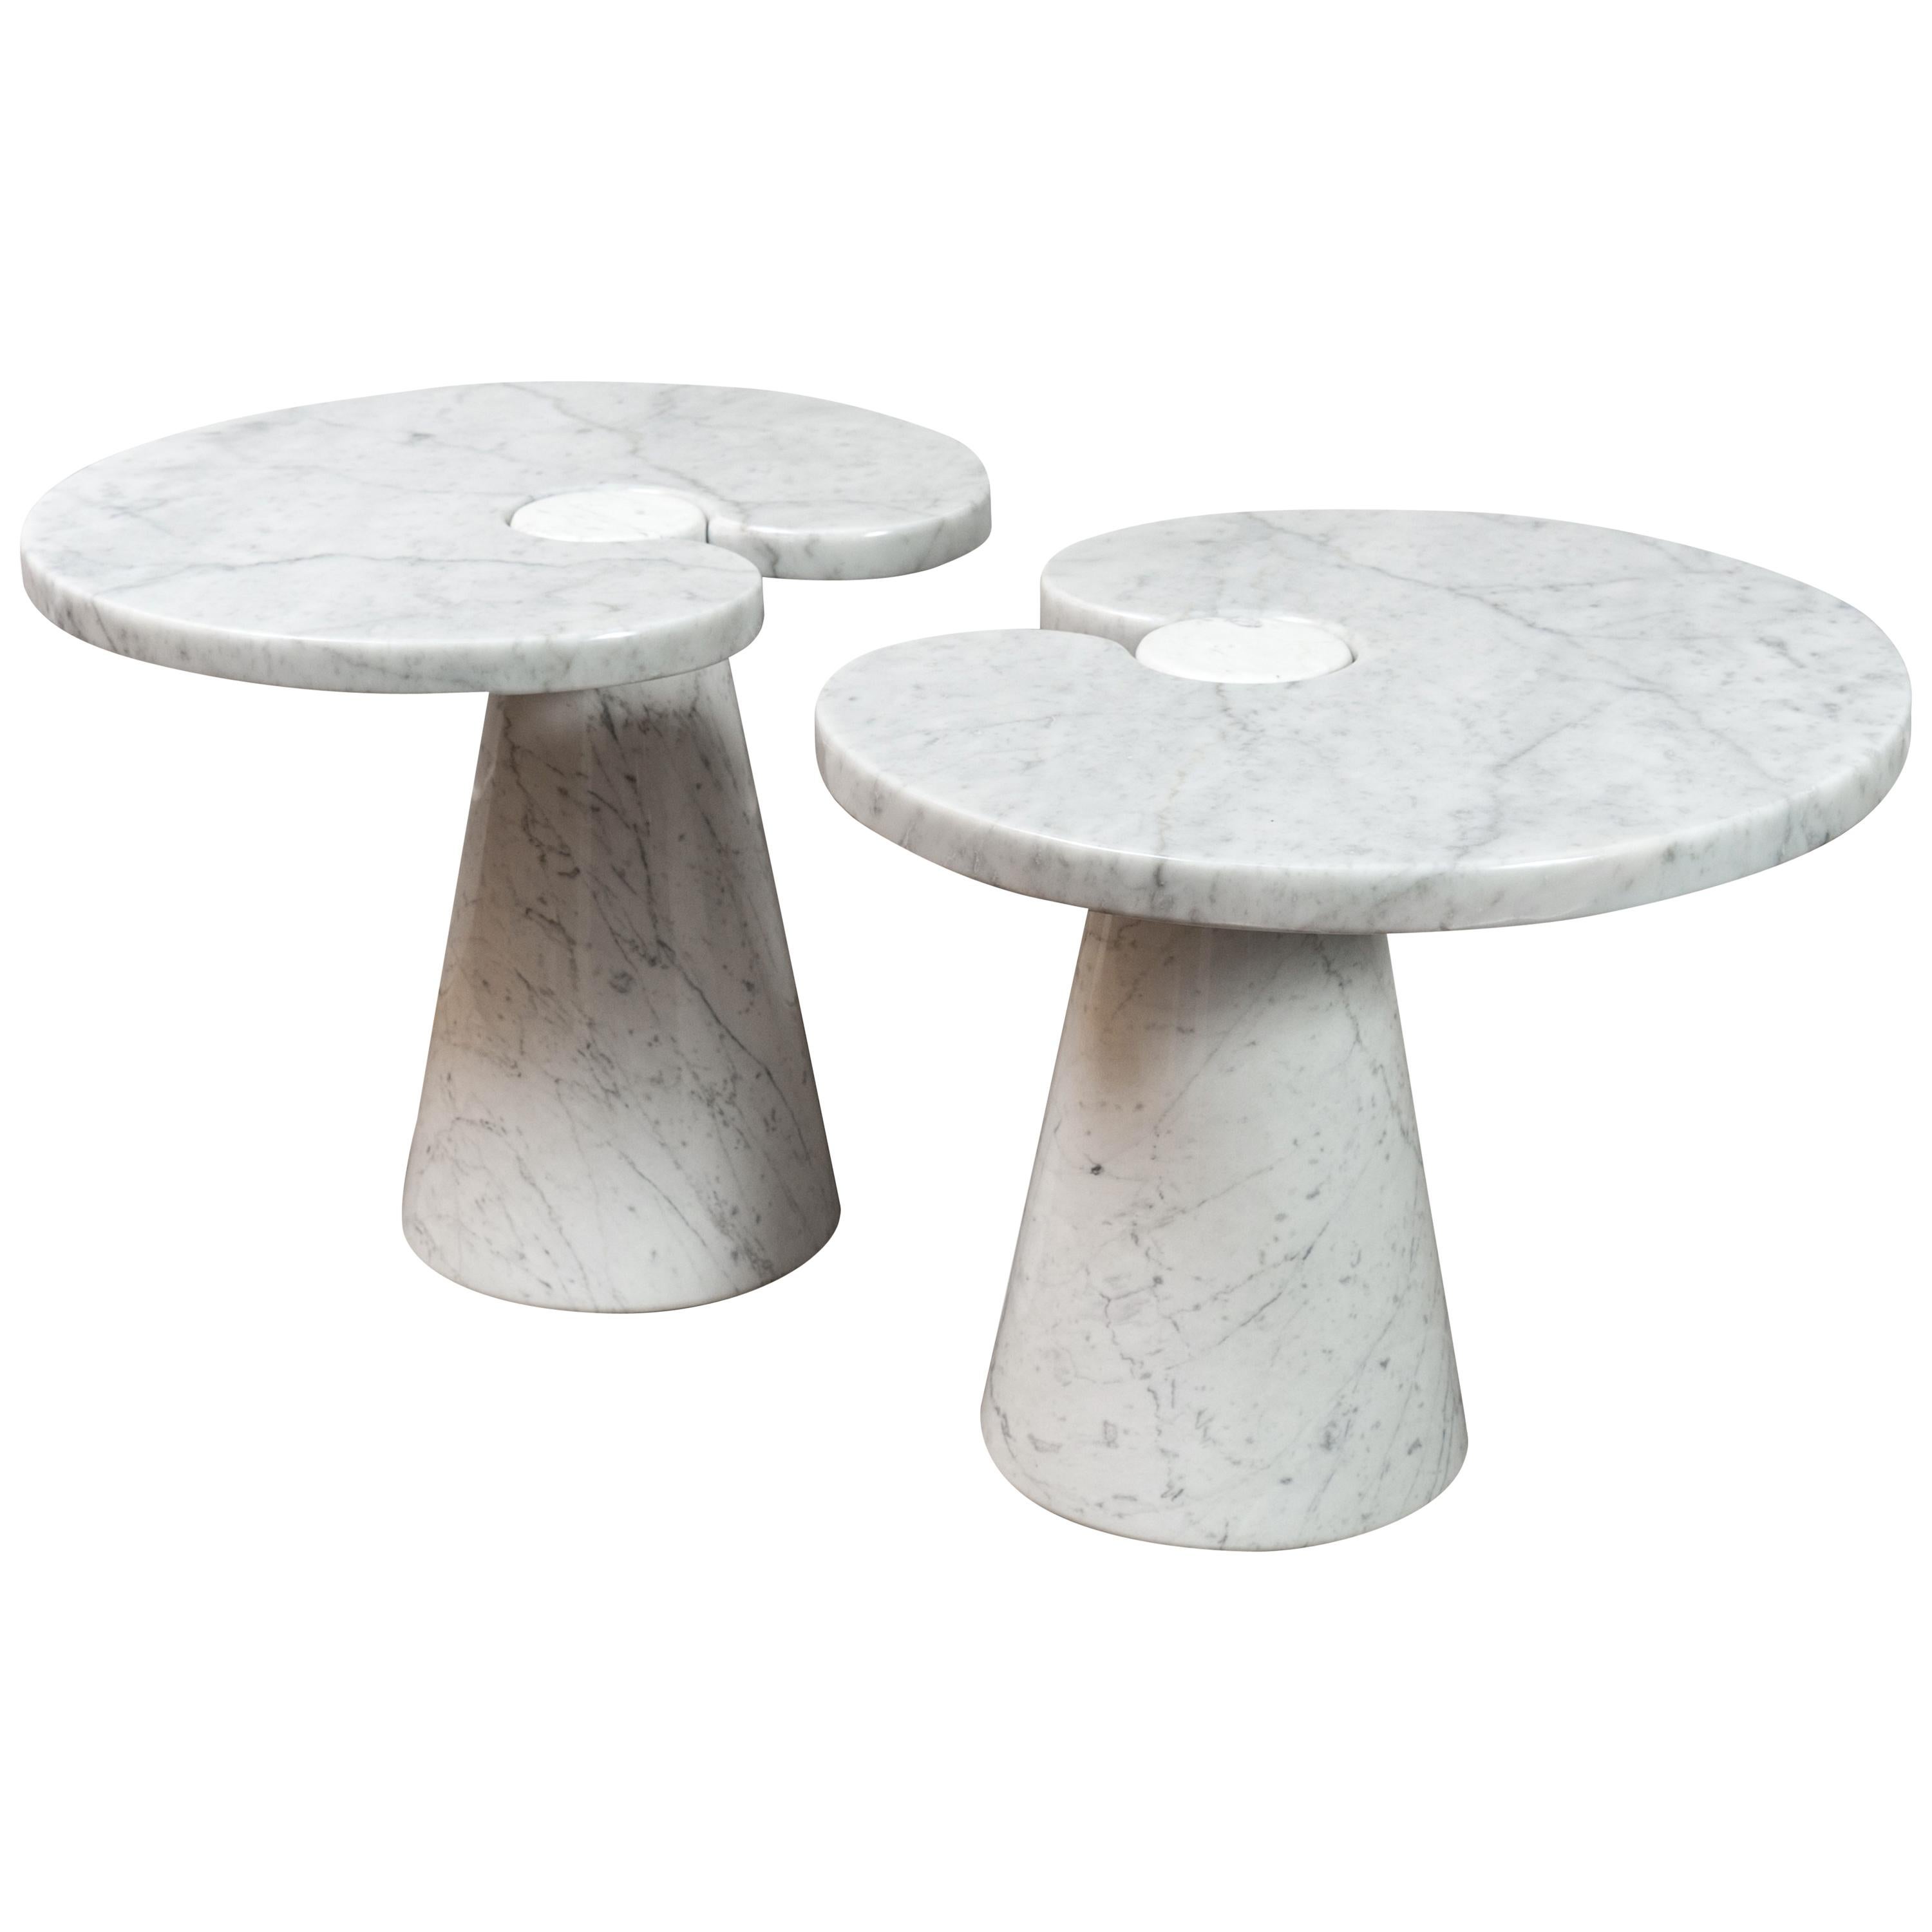  Pair of Marble "Eros" Tables by Mangiarotti